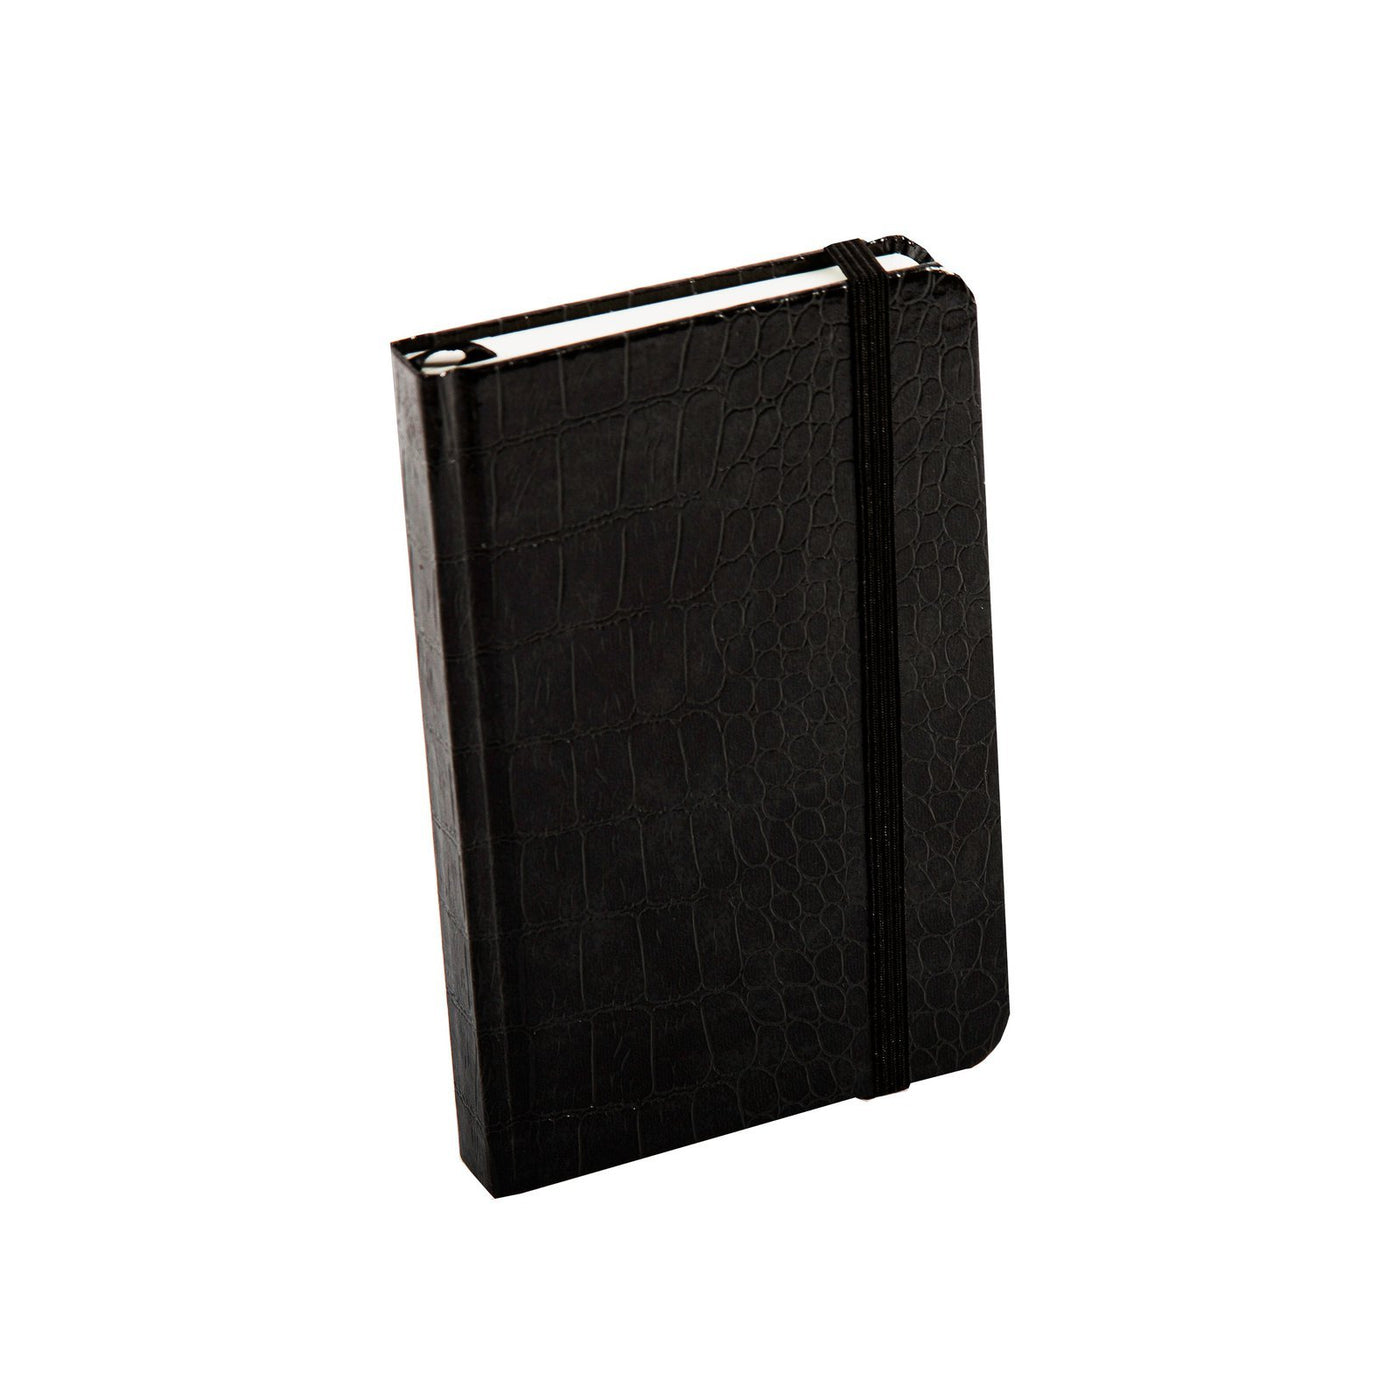 Faux Croc skin leather Notebooks from Locketts